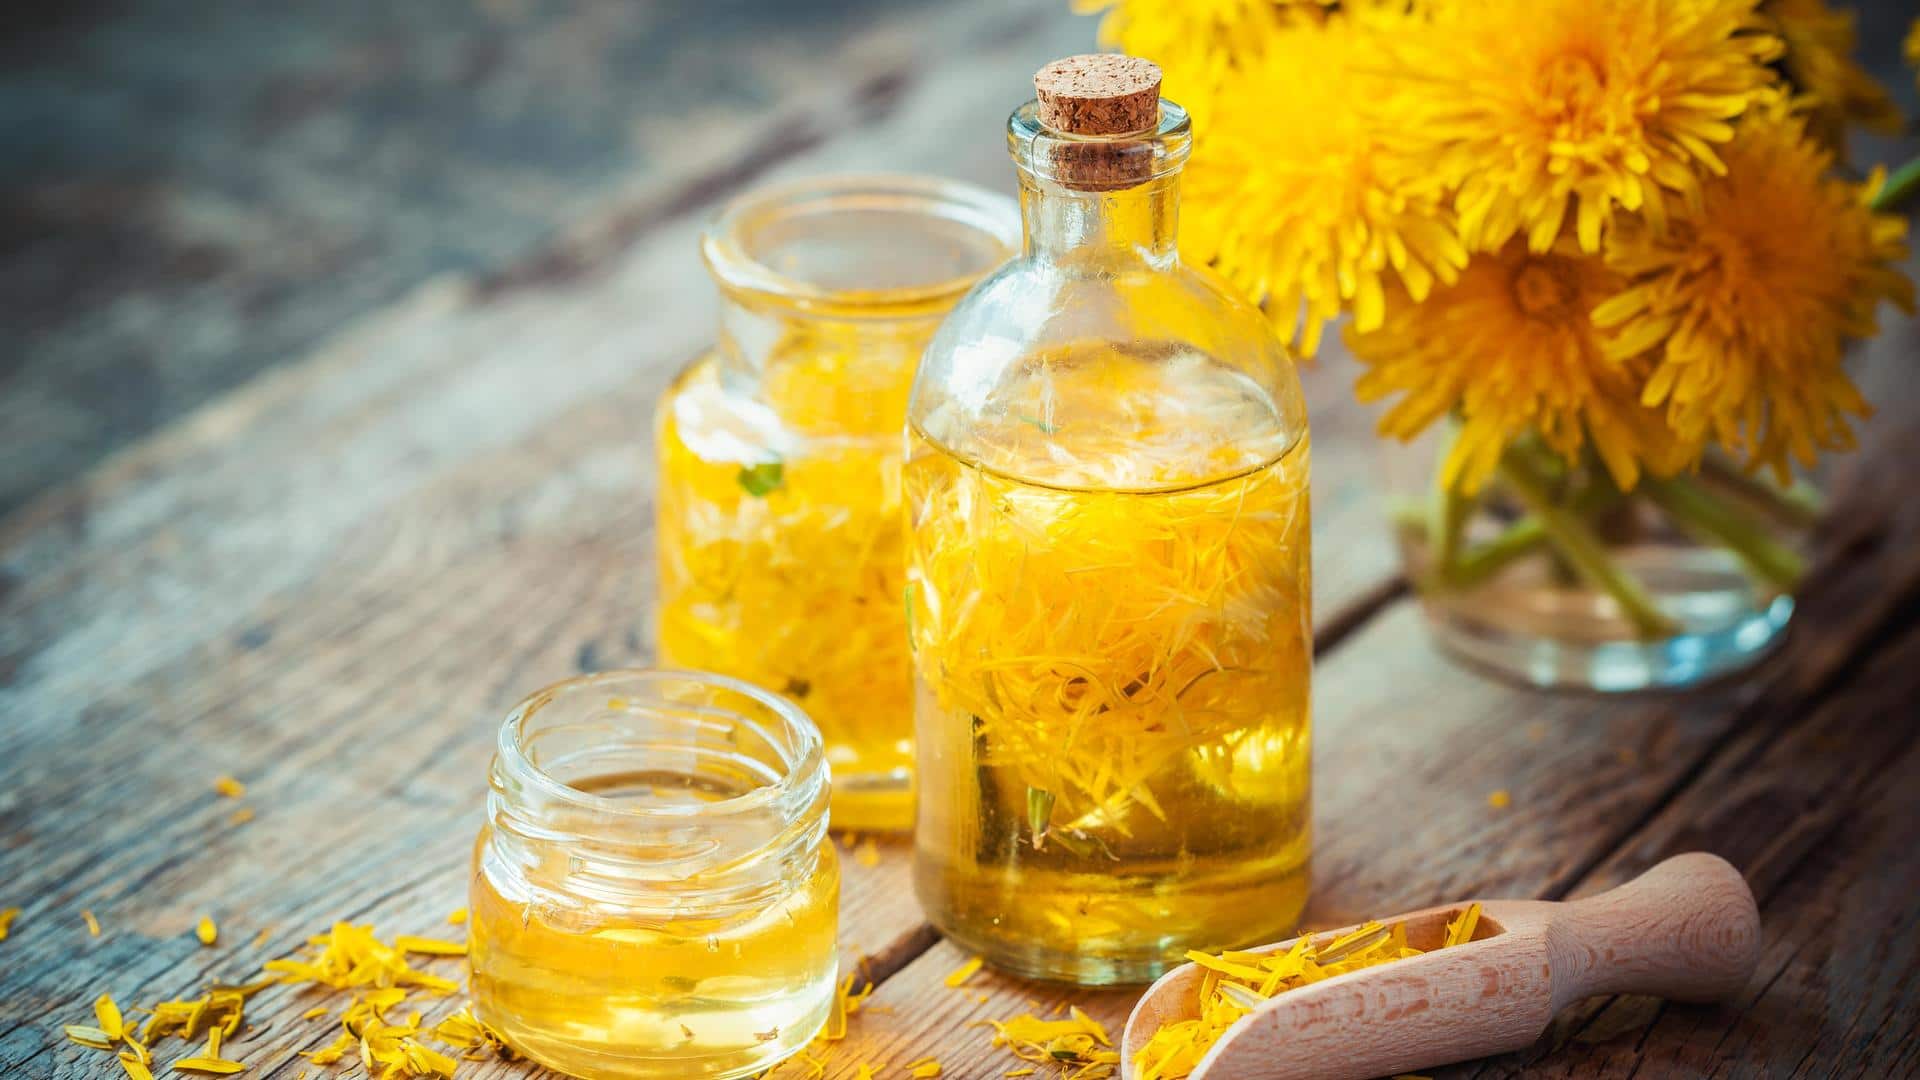 Here are some excellent health benefits of safflower oil